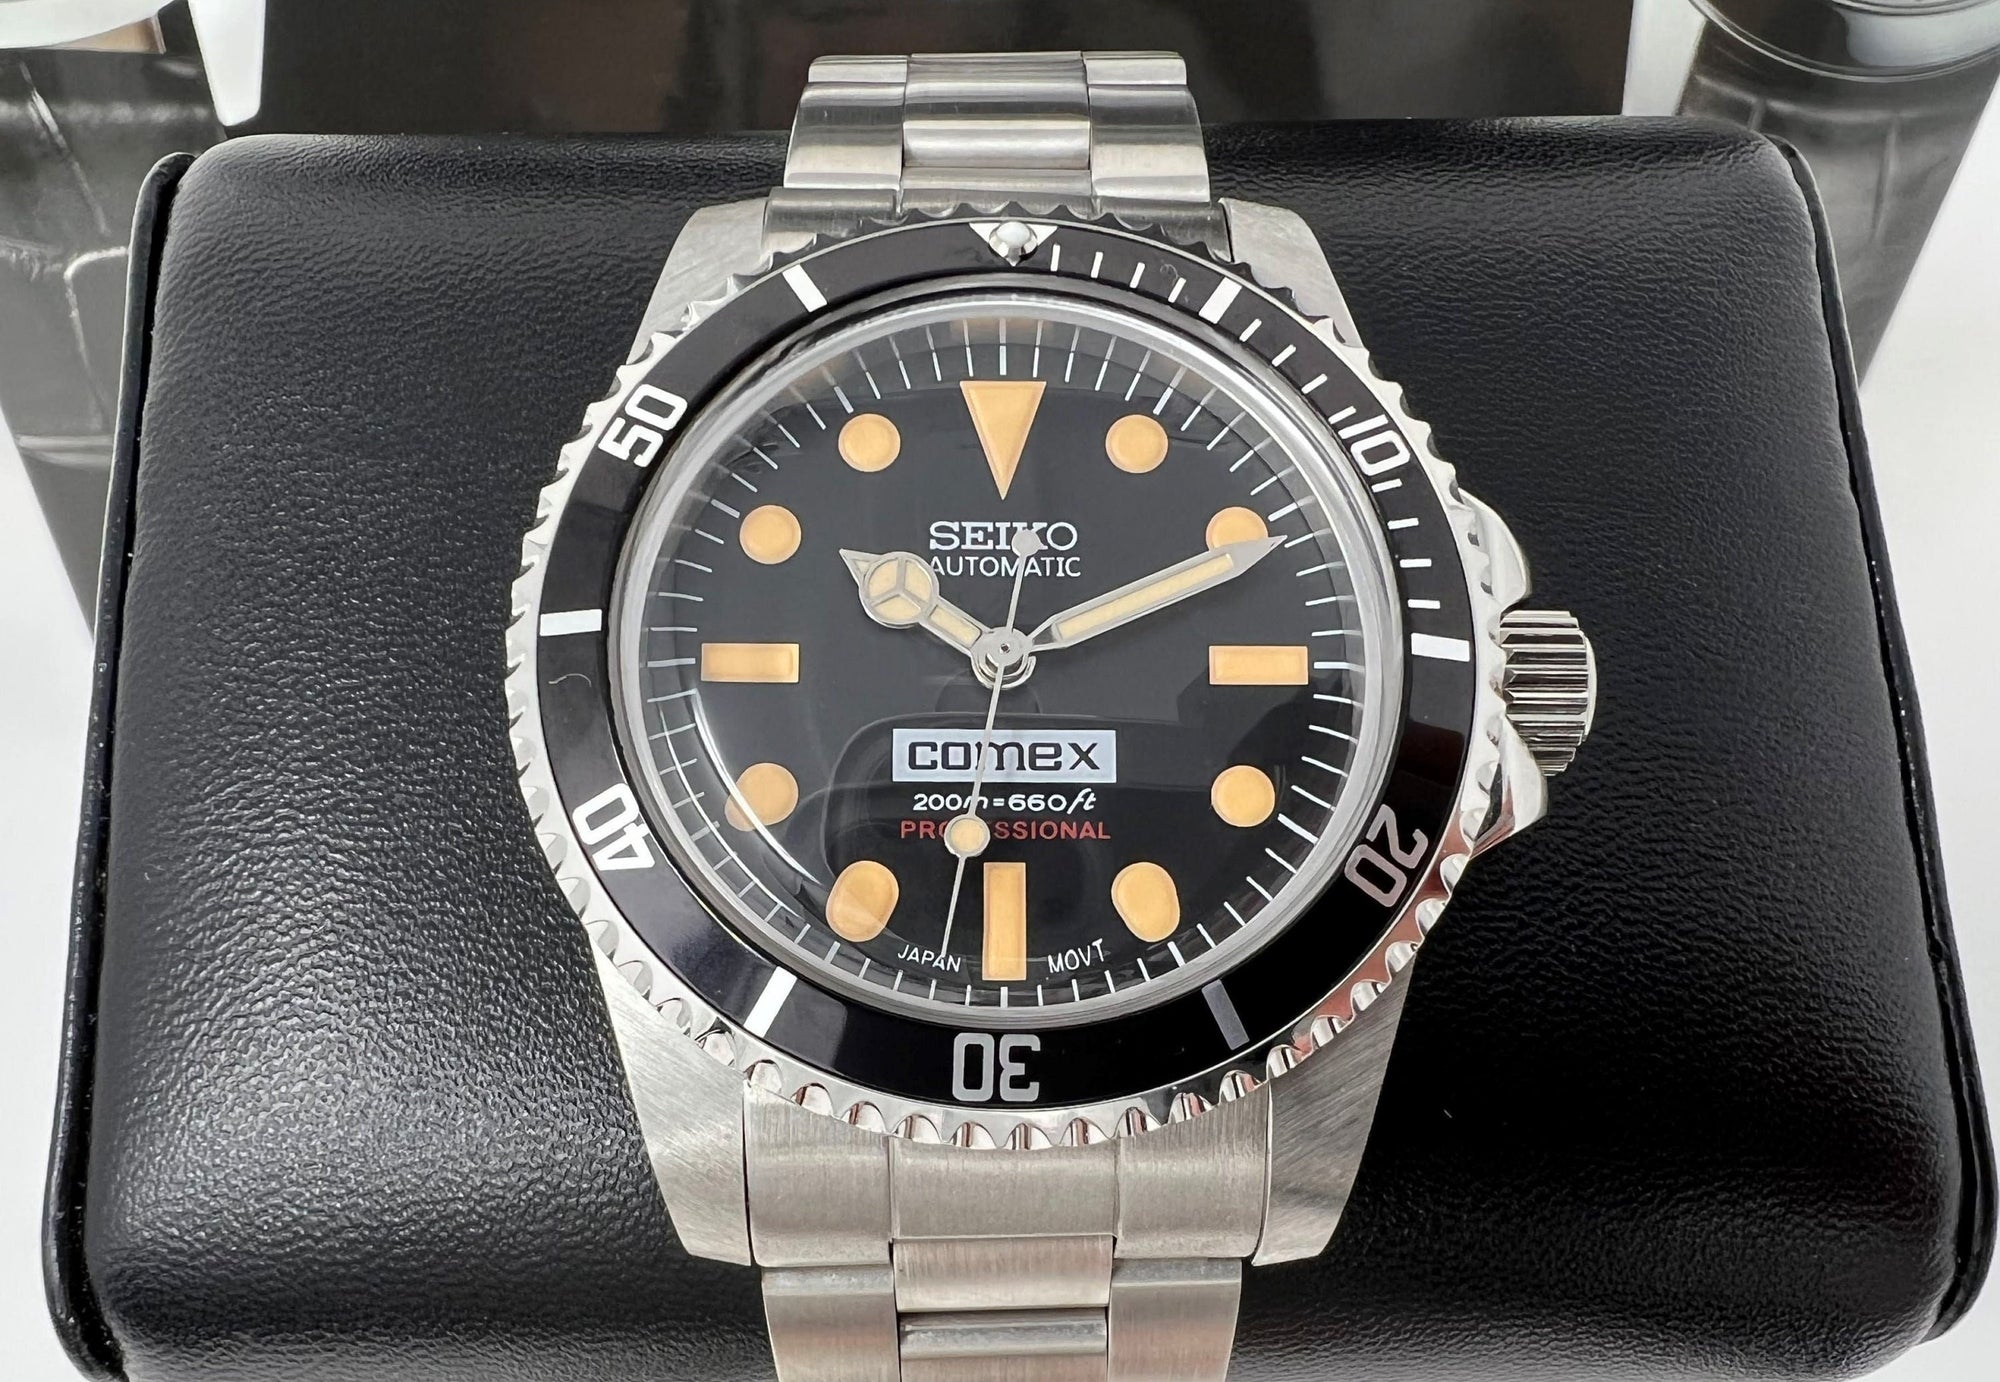 Seiko Submariner - Comex Vintage Style Diver | Beautiful Domed Crystal on Oyster | 39.5mm | Milsub | Military Sub | Vintage Sub | Diving